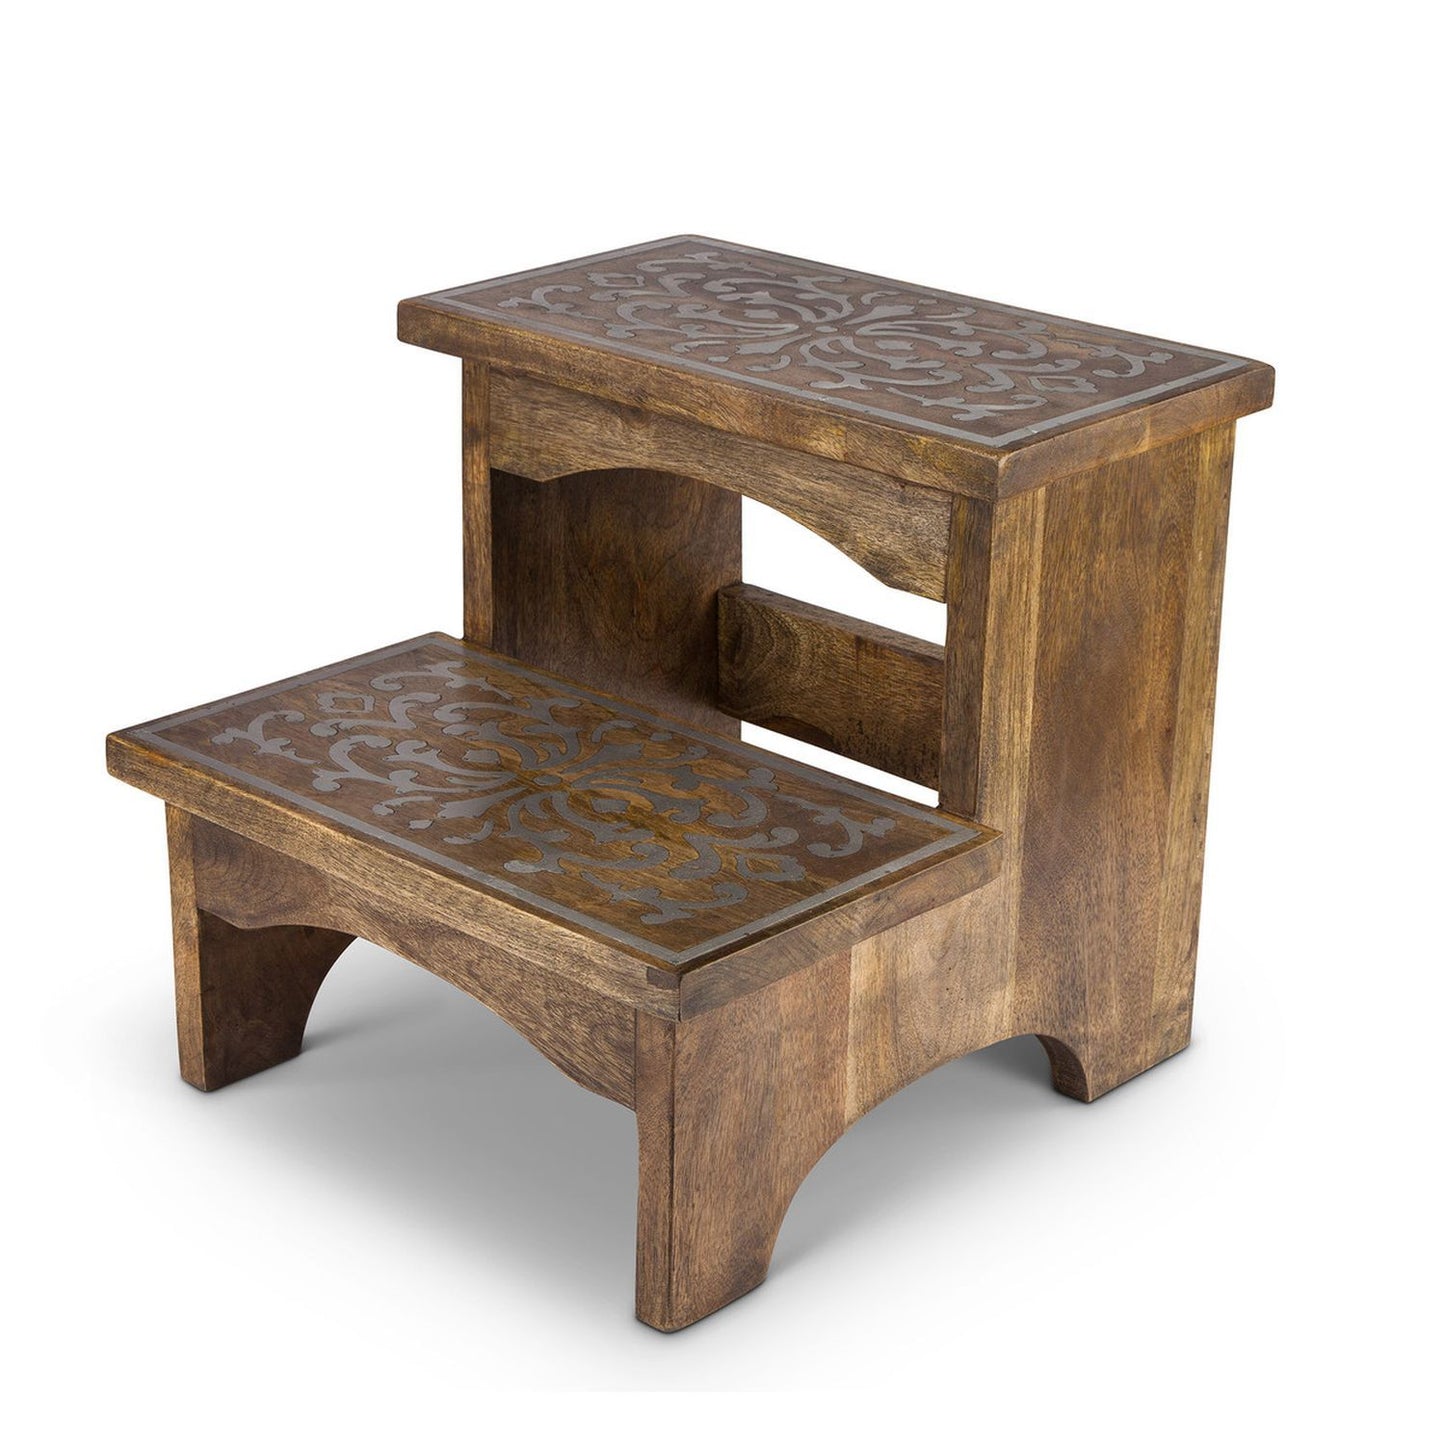 Park Hill Collection Heritage Inlay Wood Step Stool